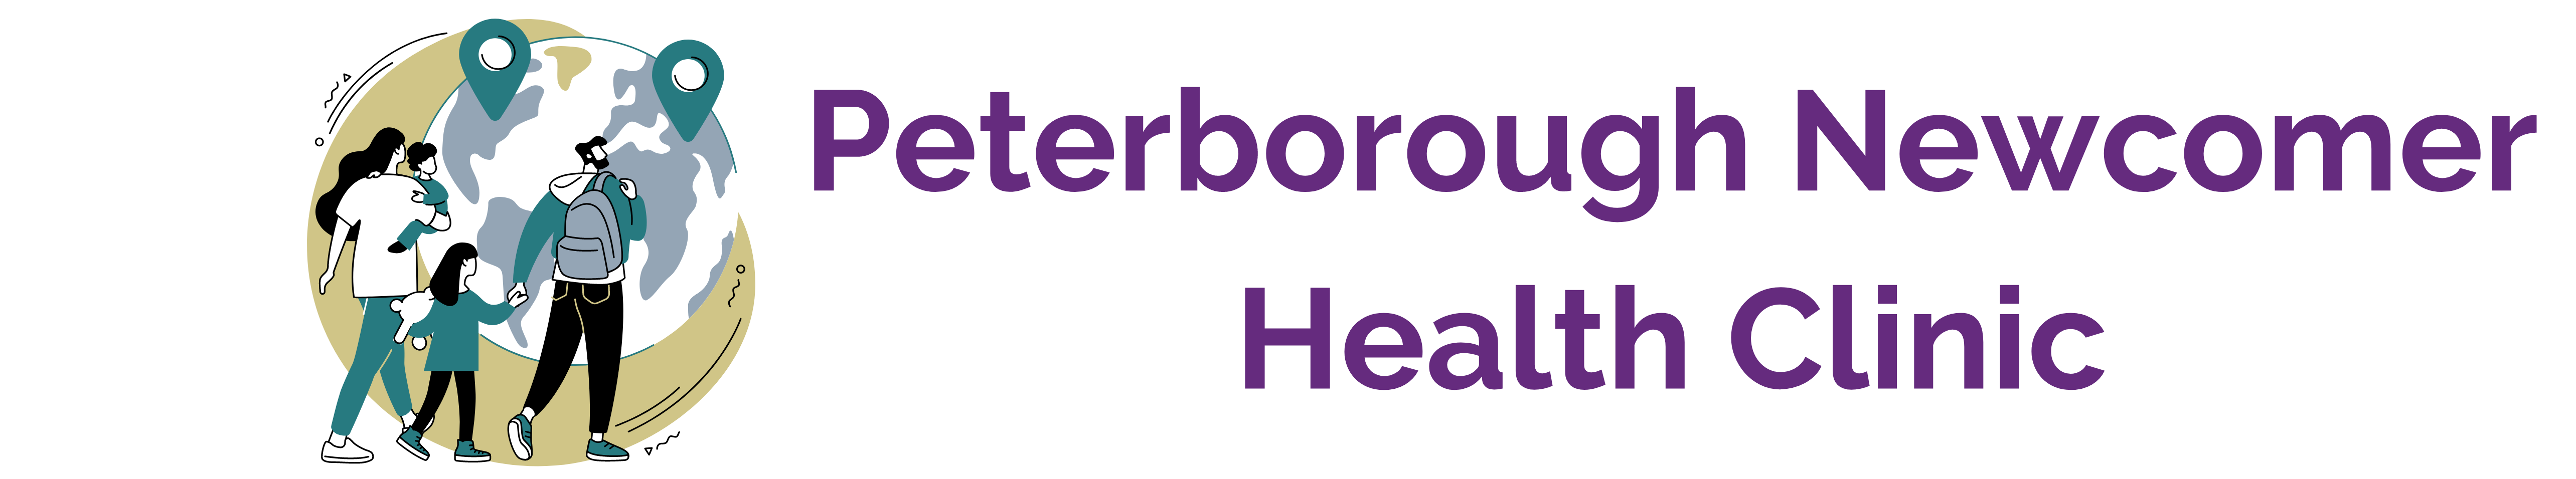 Graphic of family standing in front of globe with title: Peterborough Newcomer Health Clinic